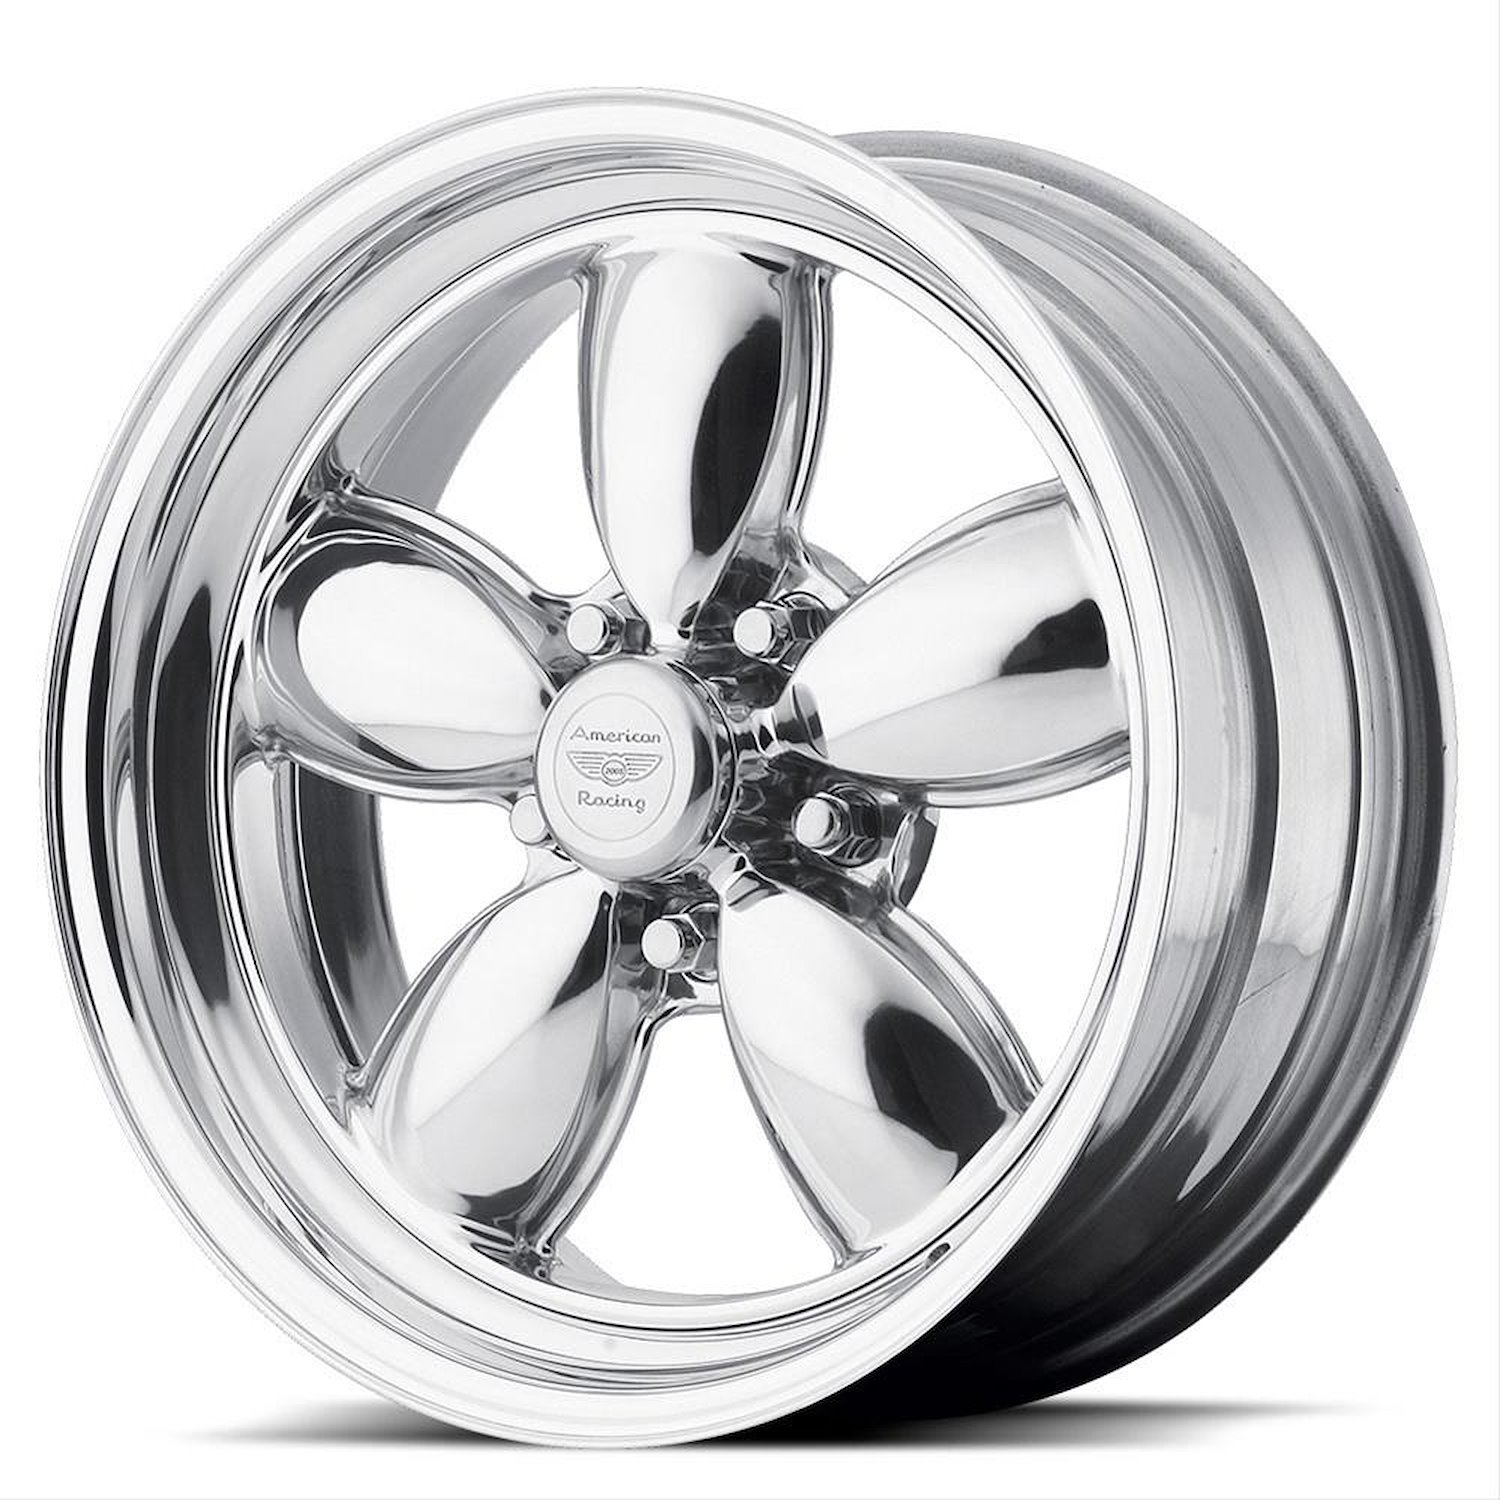 AMERICAN RACING CLASSIC 200S TWO-PIECE POLISHED 15 x 10 5X4.75 0 5.50